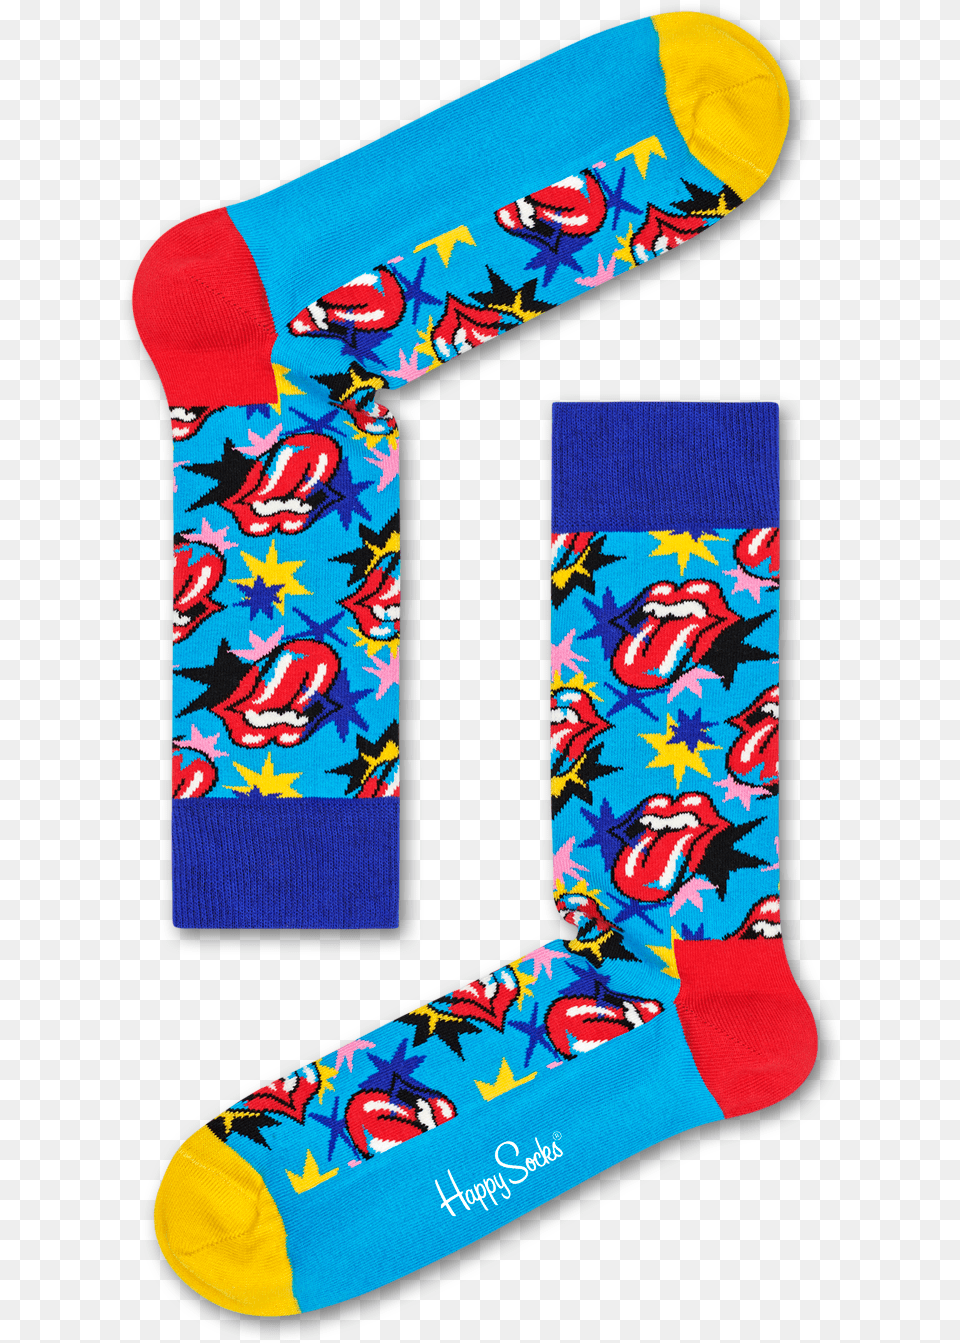 Happy Socks Rolling Stones, Clothing, Hosiery, Christmas, Christmas Decorations Png Image